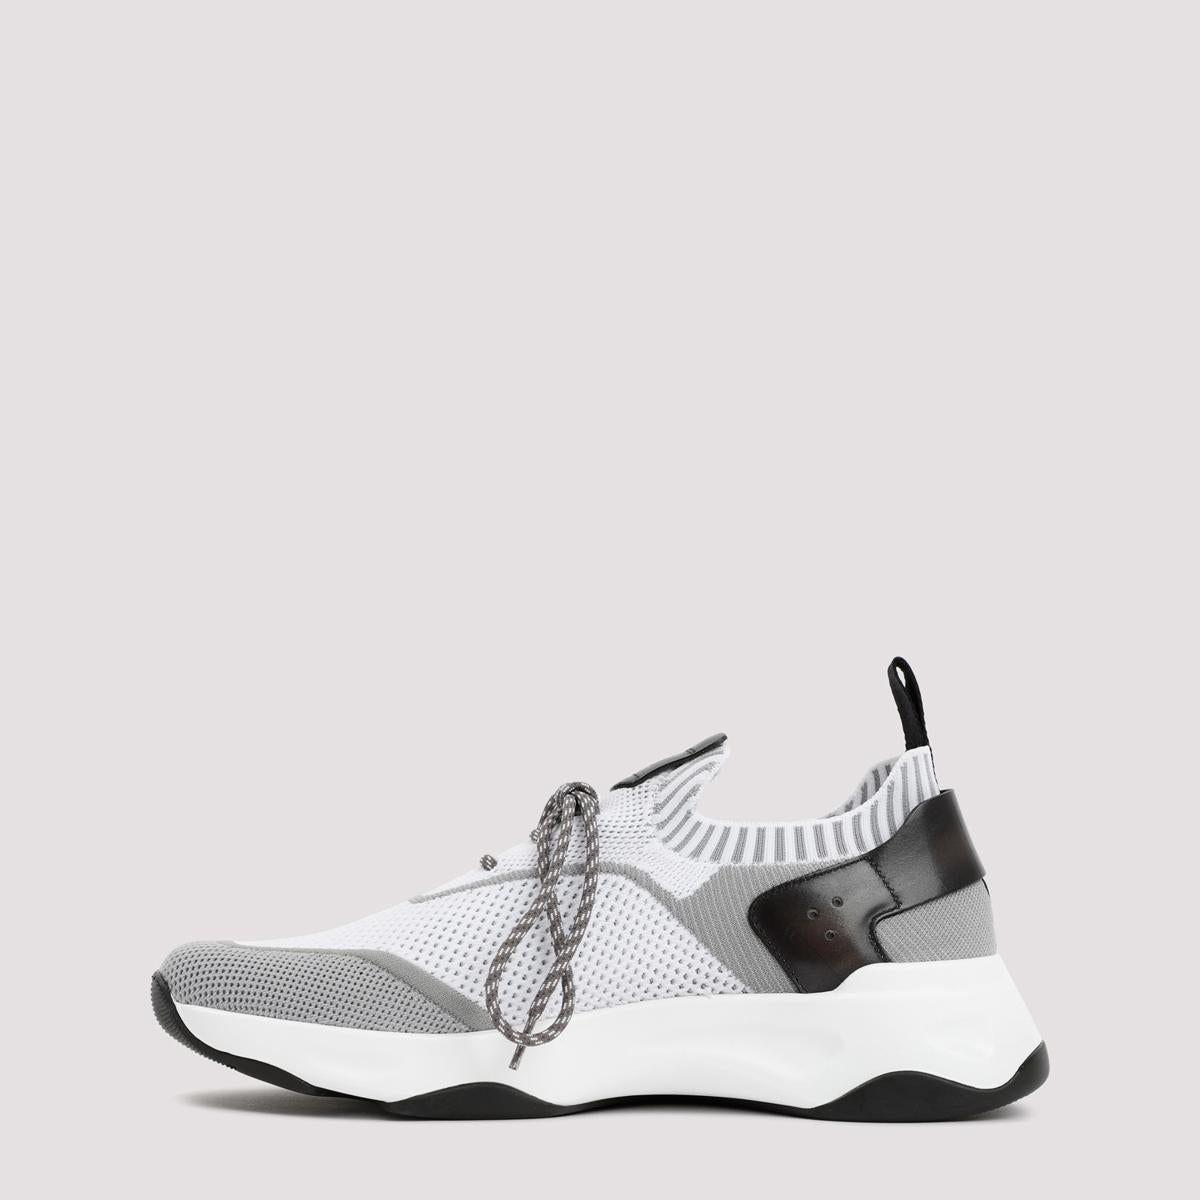 Shop Berluti Playoff 2022-23FW Playoff Scritto Leather Sneaker (S5867-V2)  by who.me.see | BUYMA